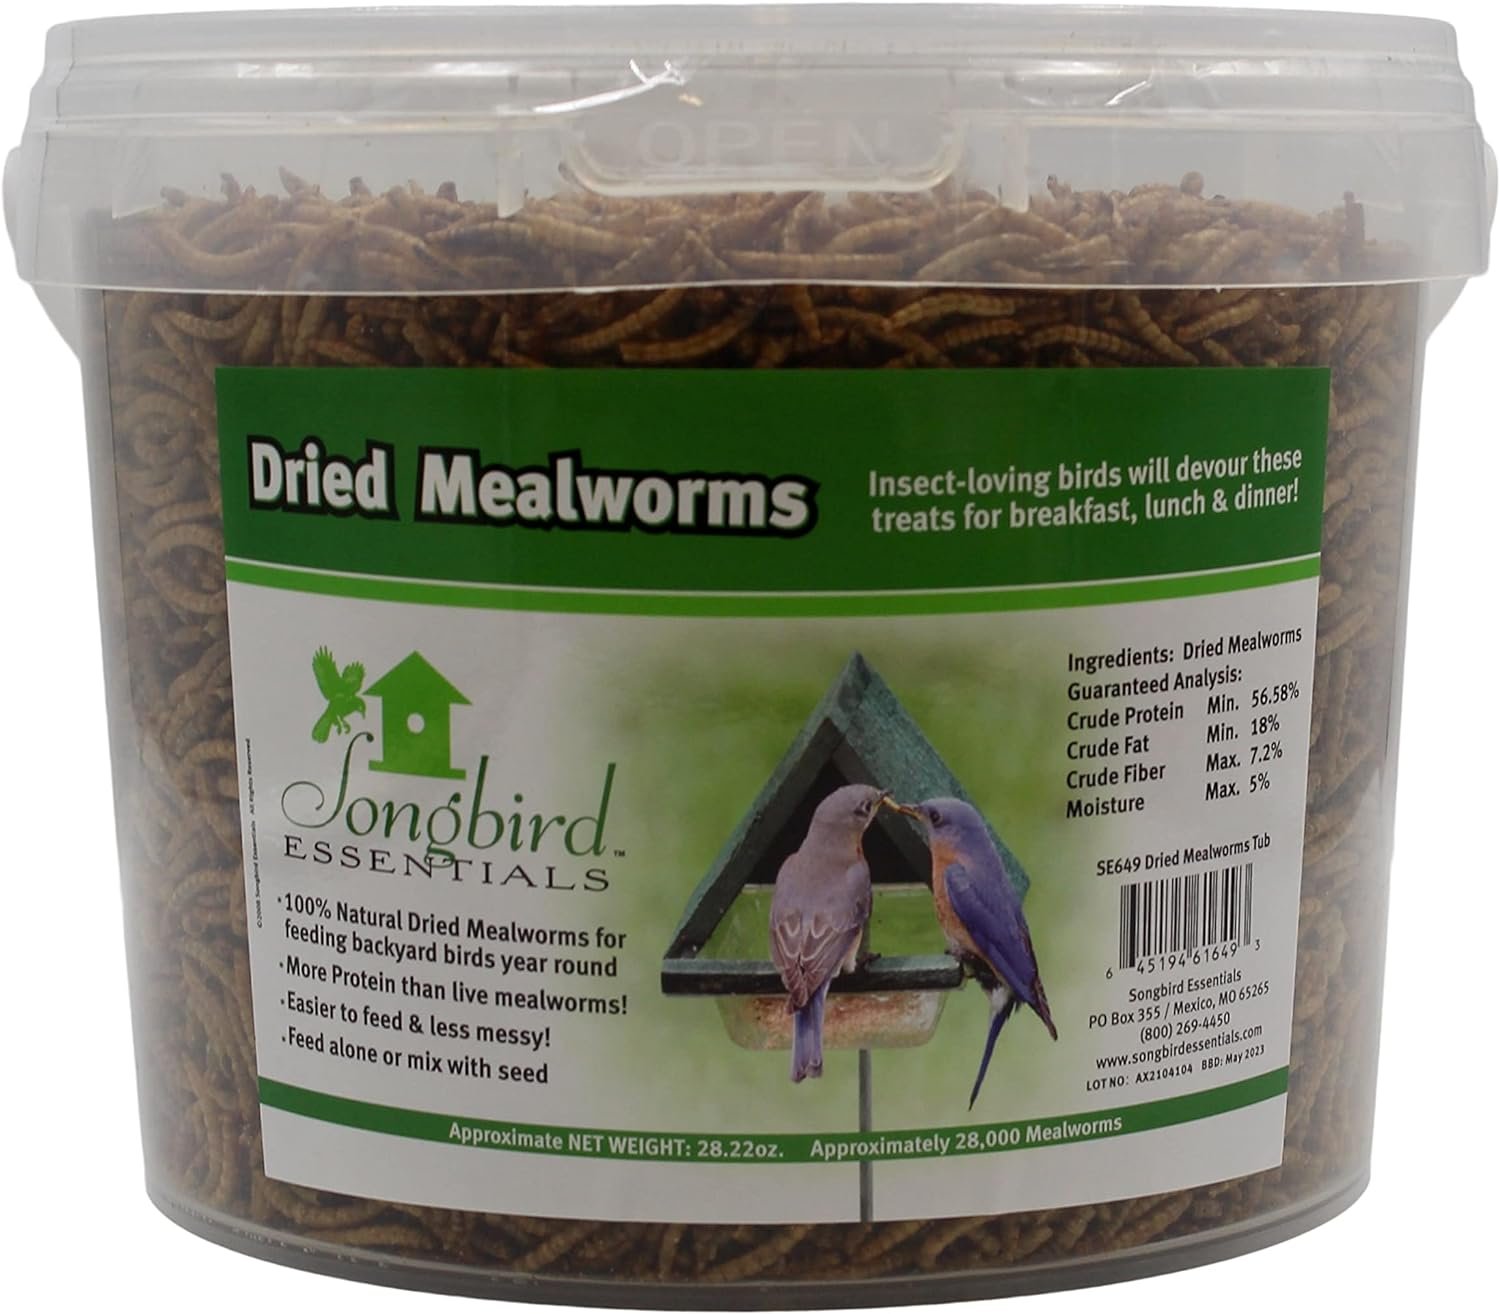 Songbird Essentials Dried Mealworms for Wild Birds, 100% Natural Mealworms for Chickens, Bluebirds, Reptiles and Ducks, 28.22 Ounce Bucket